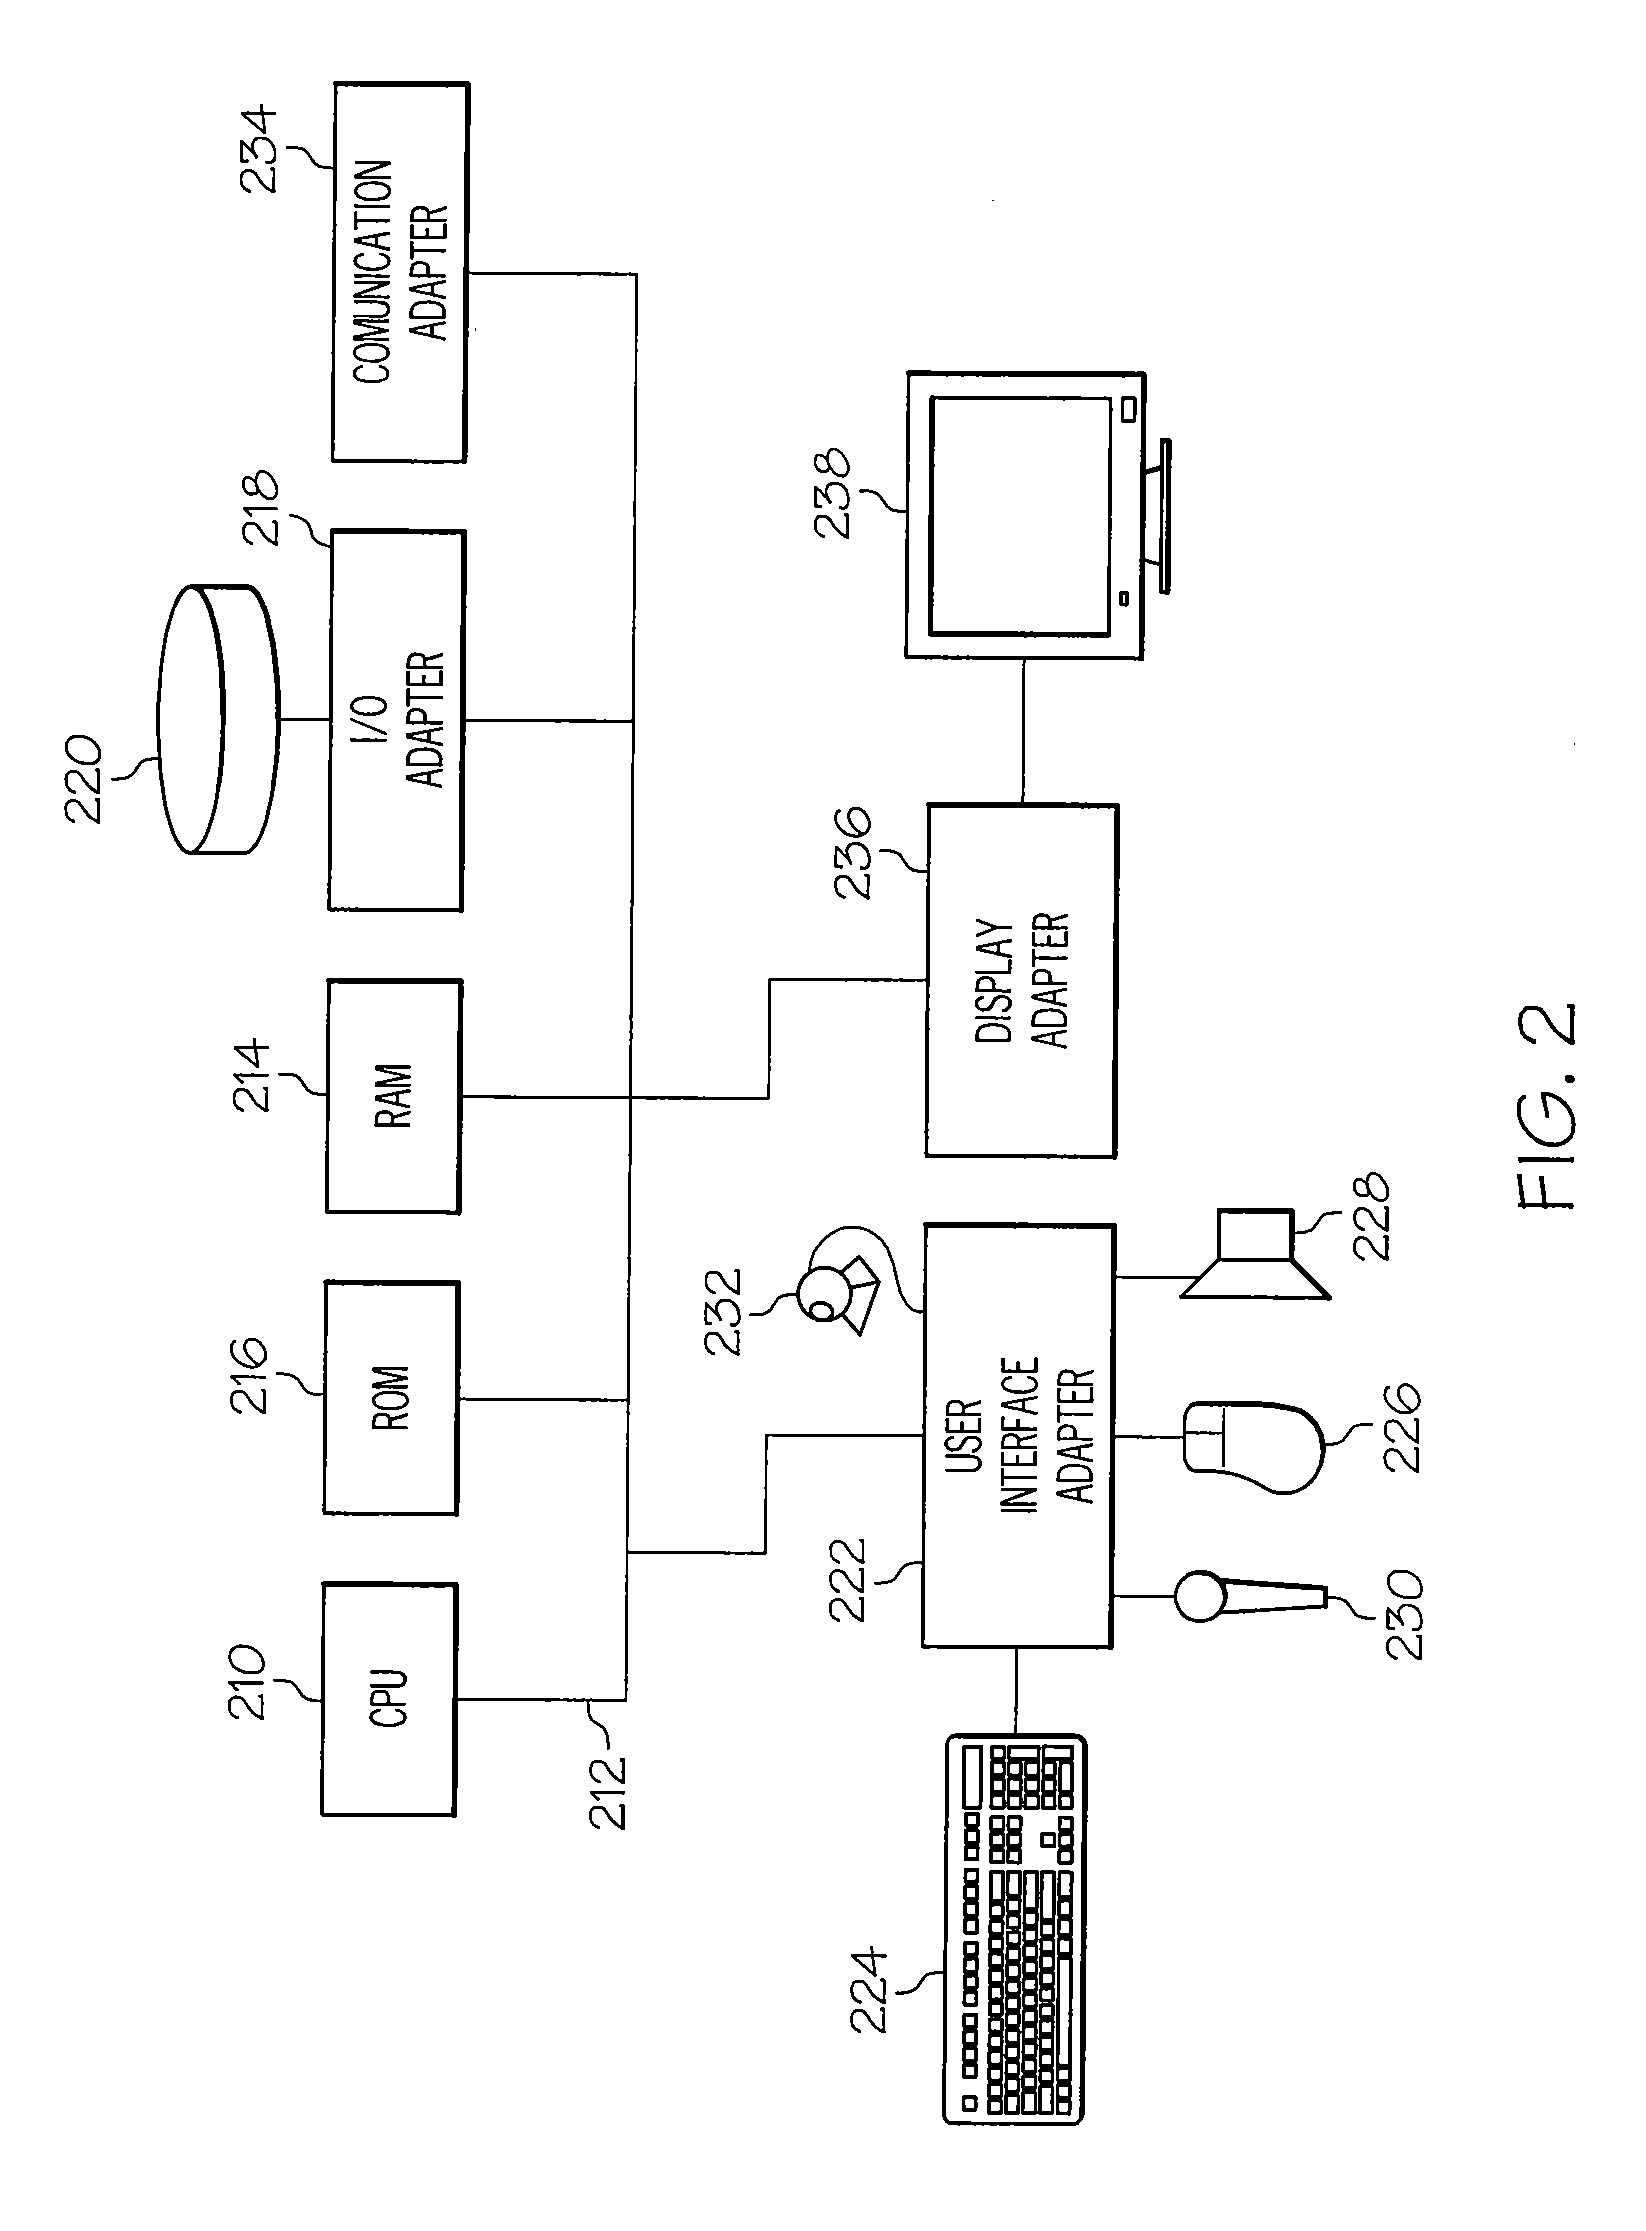 System, method, and article of manufacture for managing a health and human services regional network